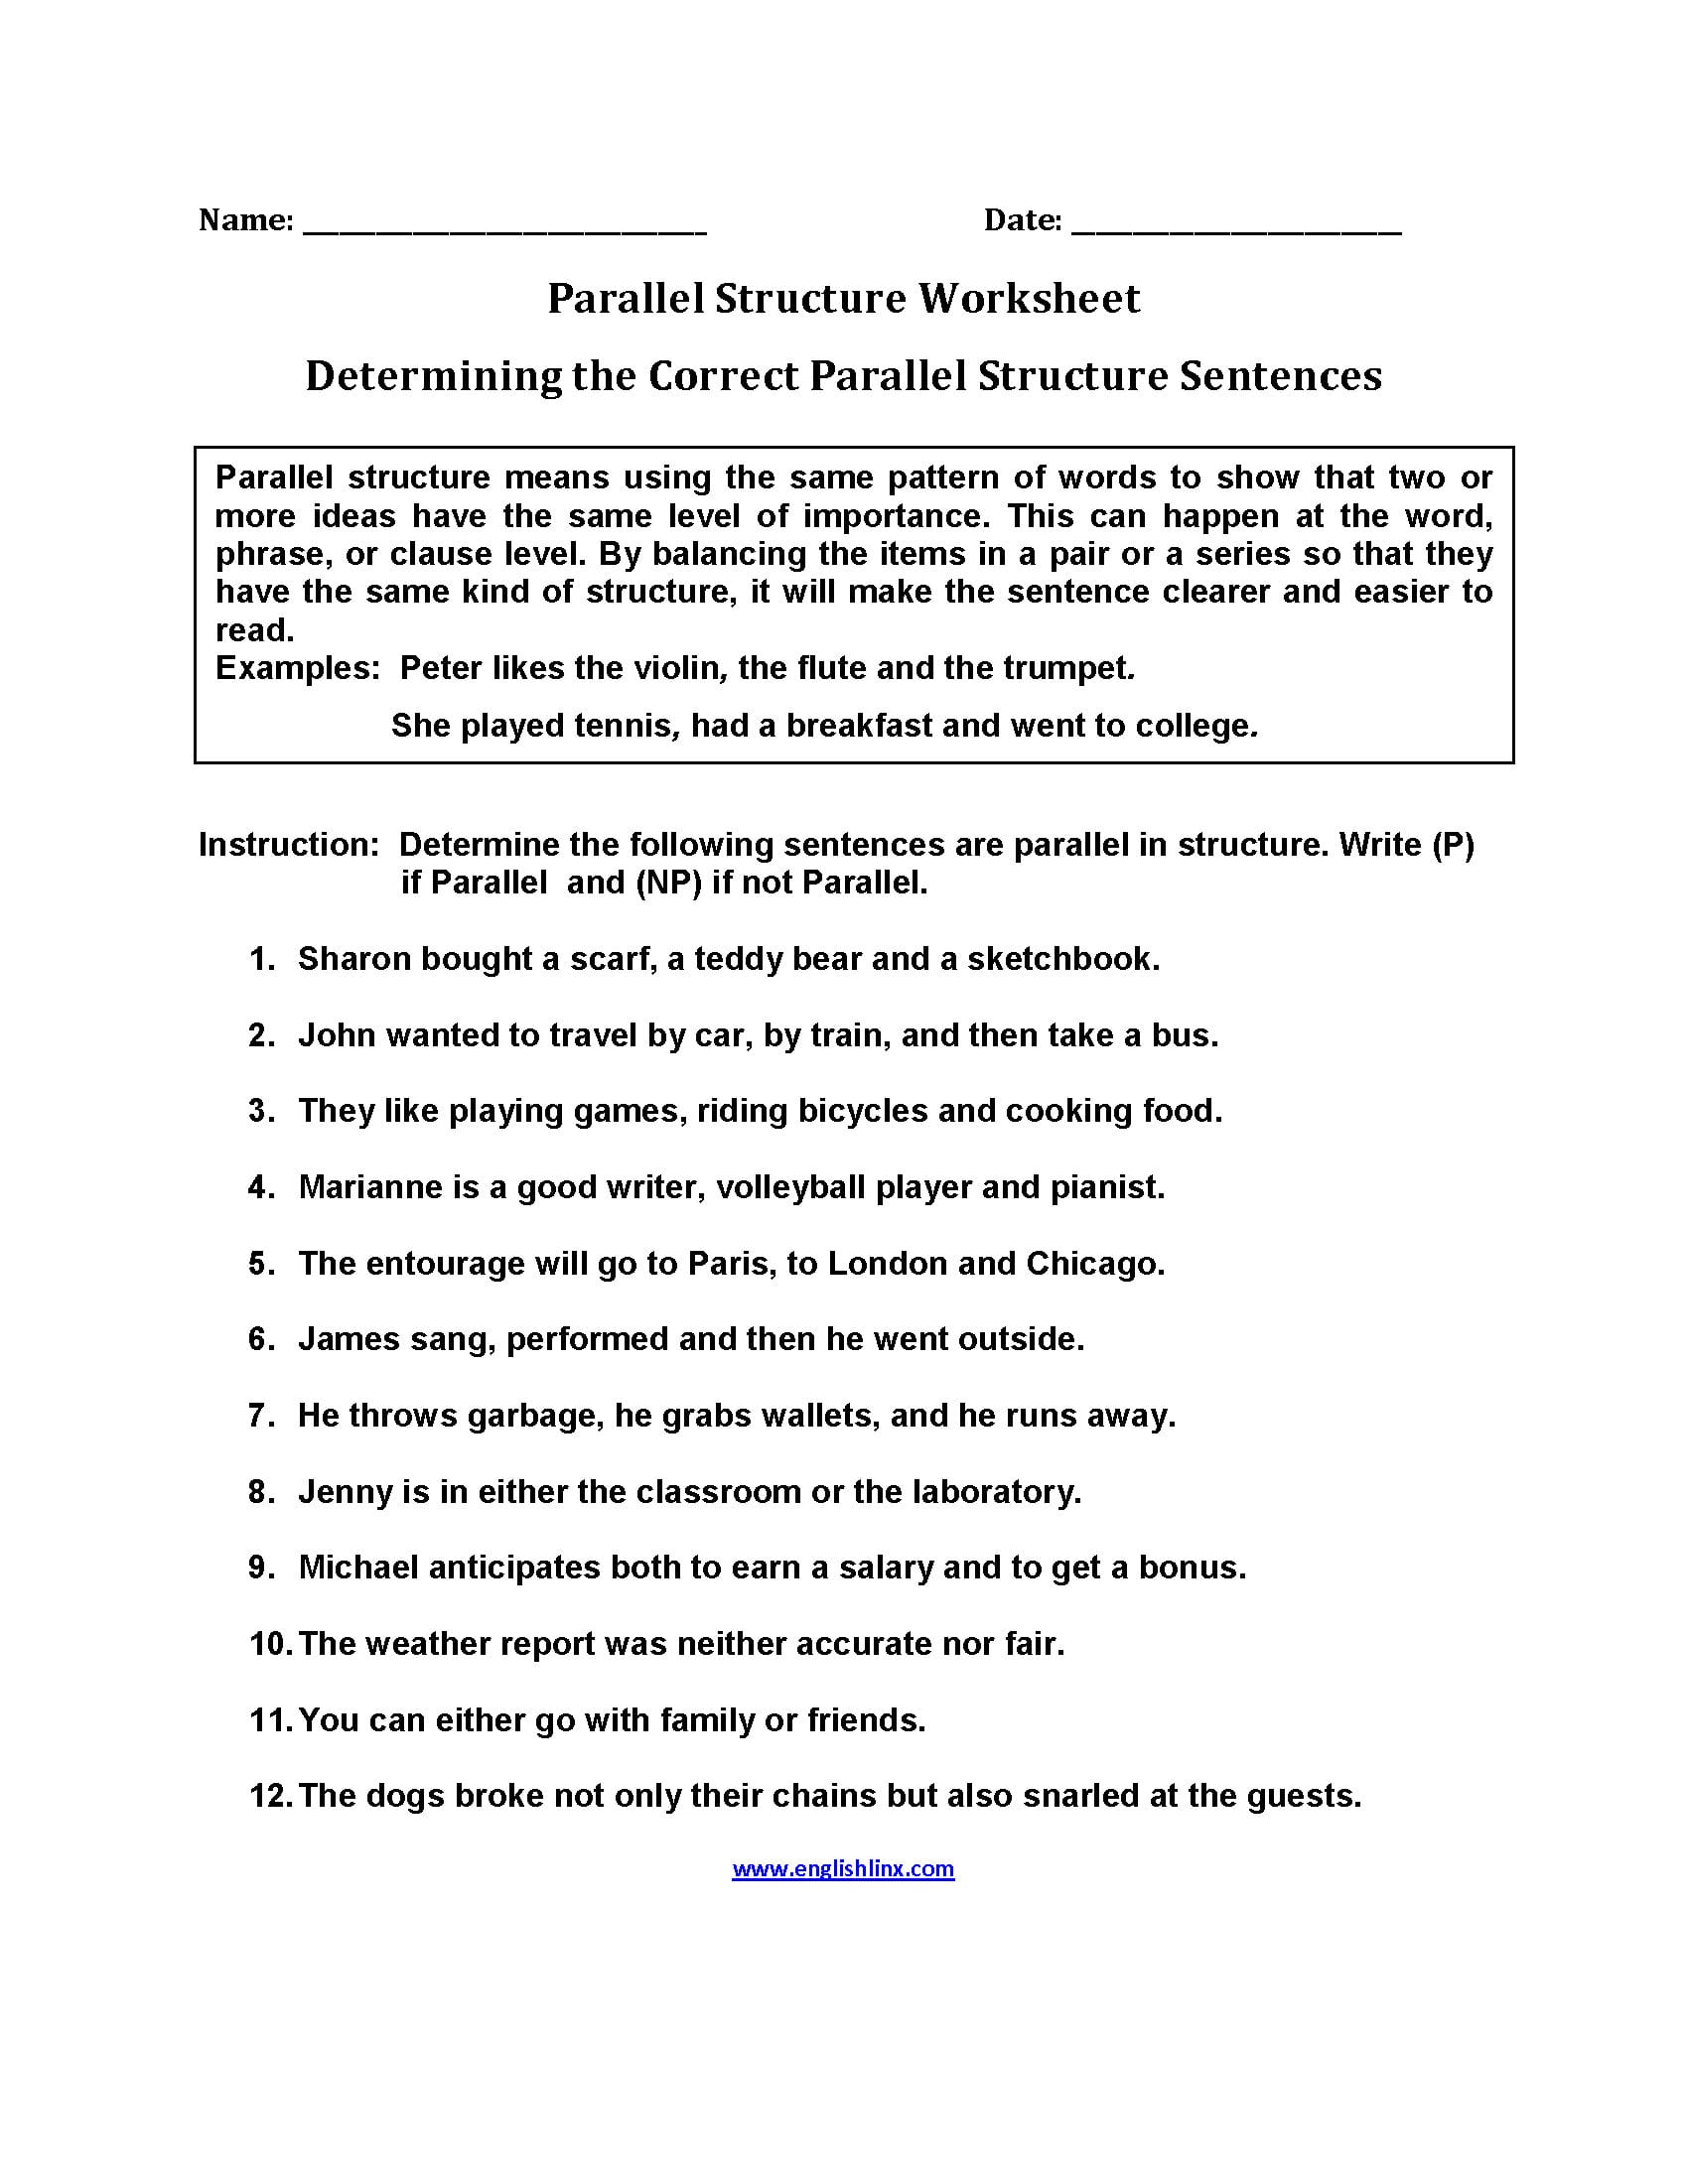 grammar-practice-parallel-structure-worksheet-answers-db-excel